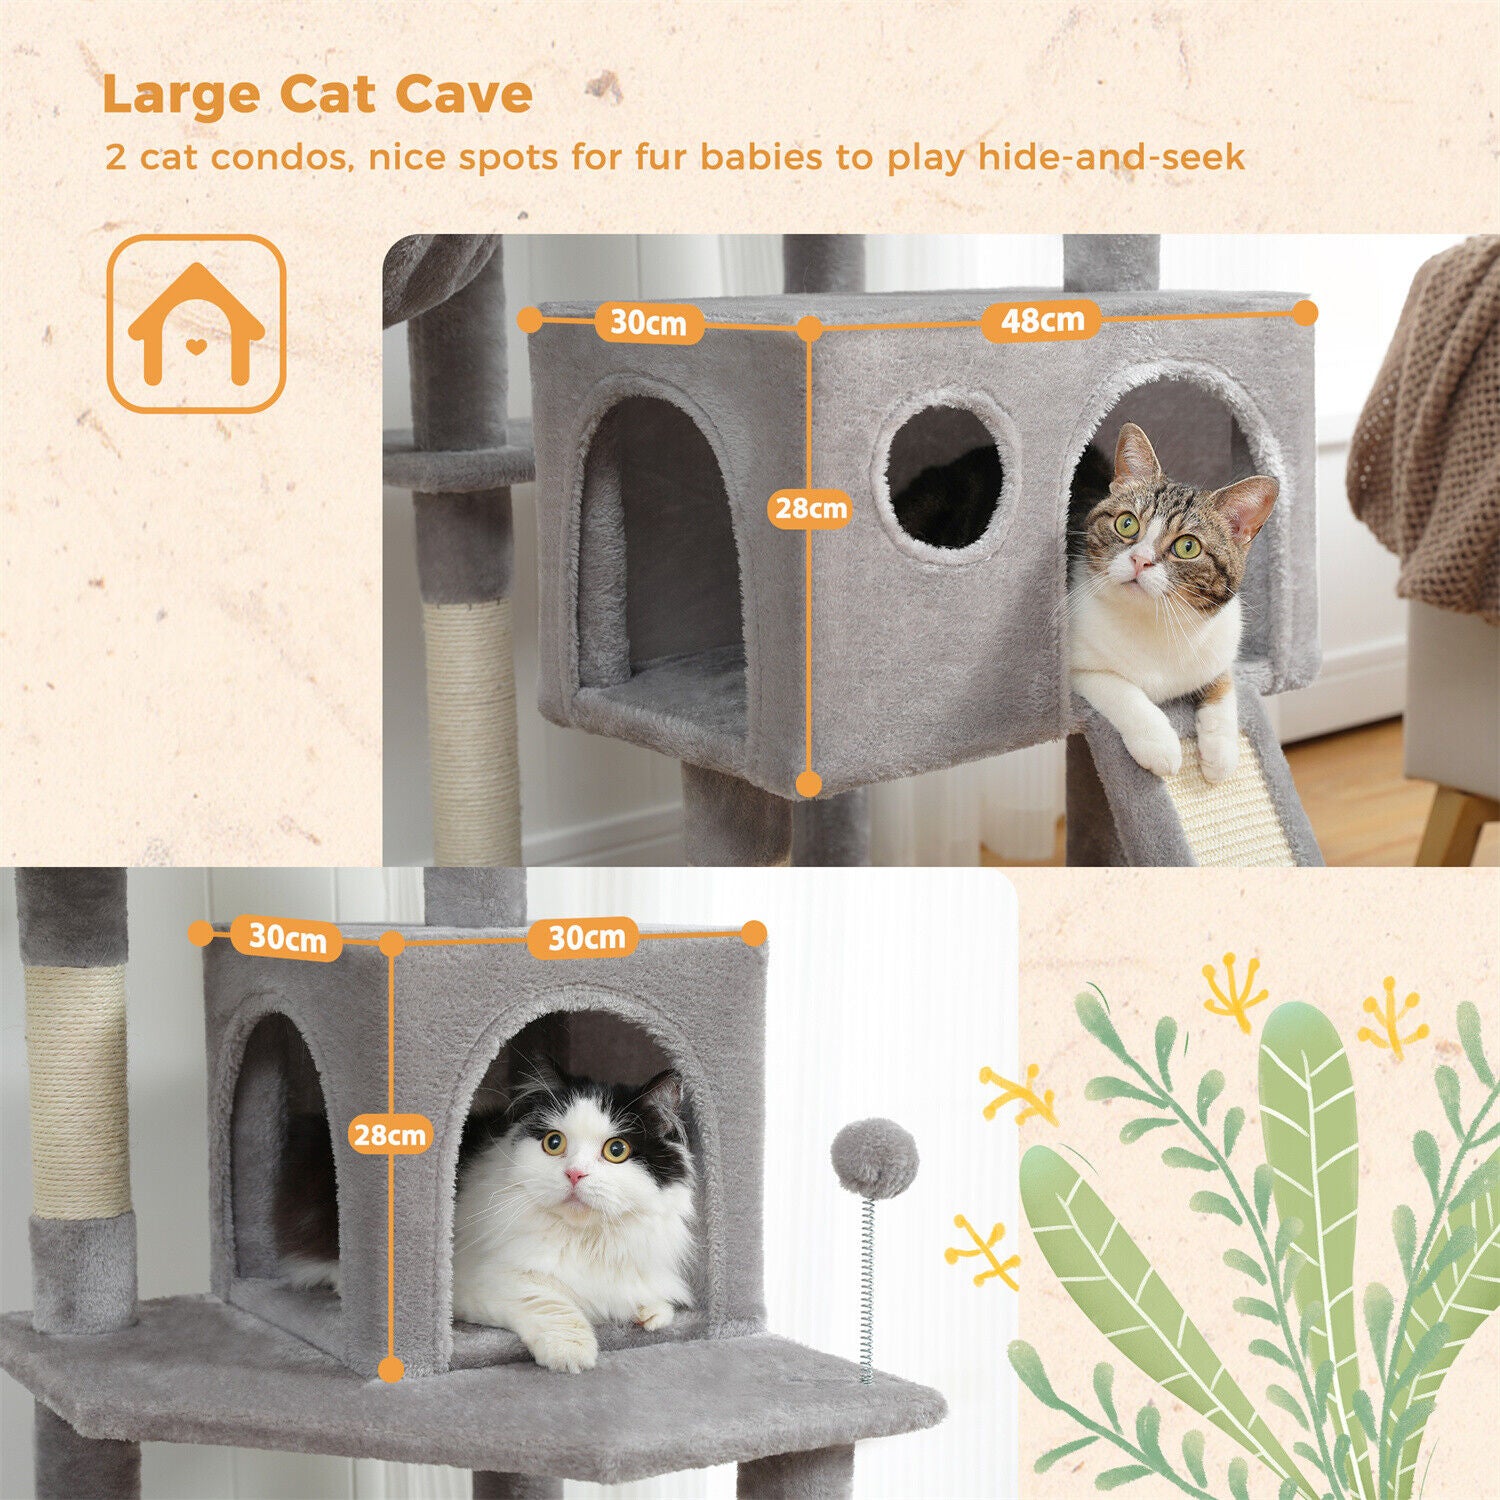 162cm Large Cat Tree Tower Scratching Post Scratcher Condo House Furniture